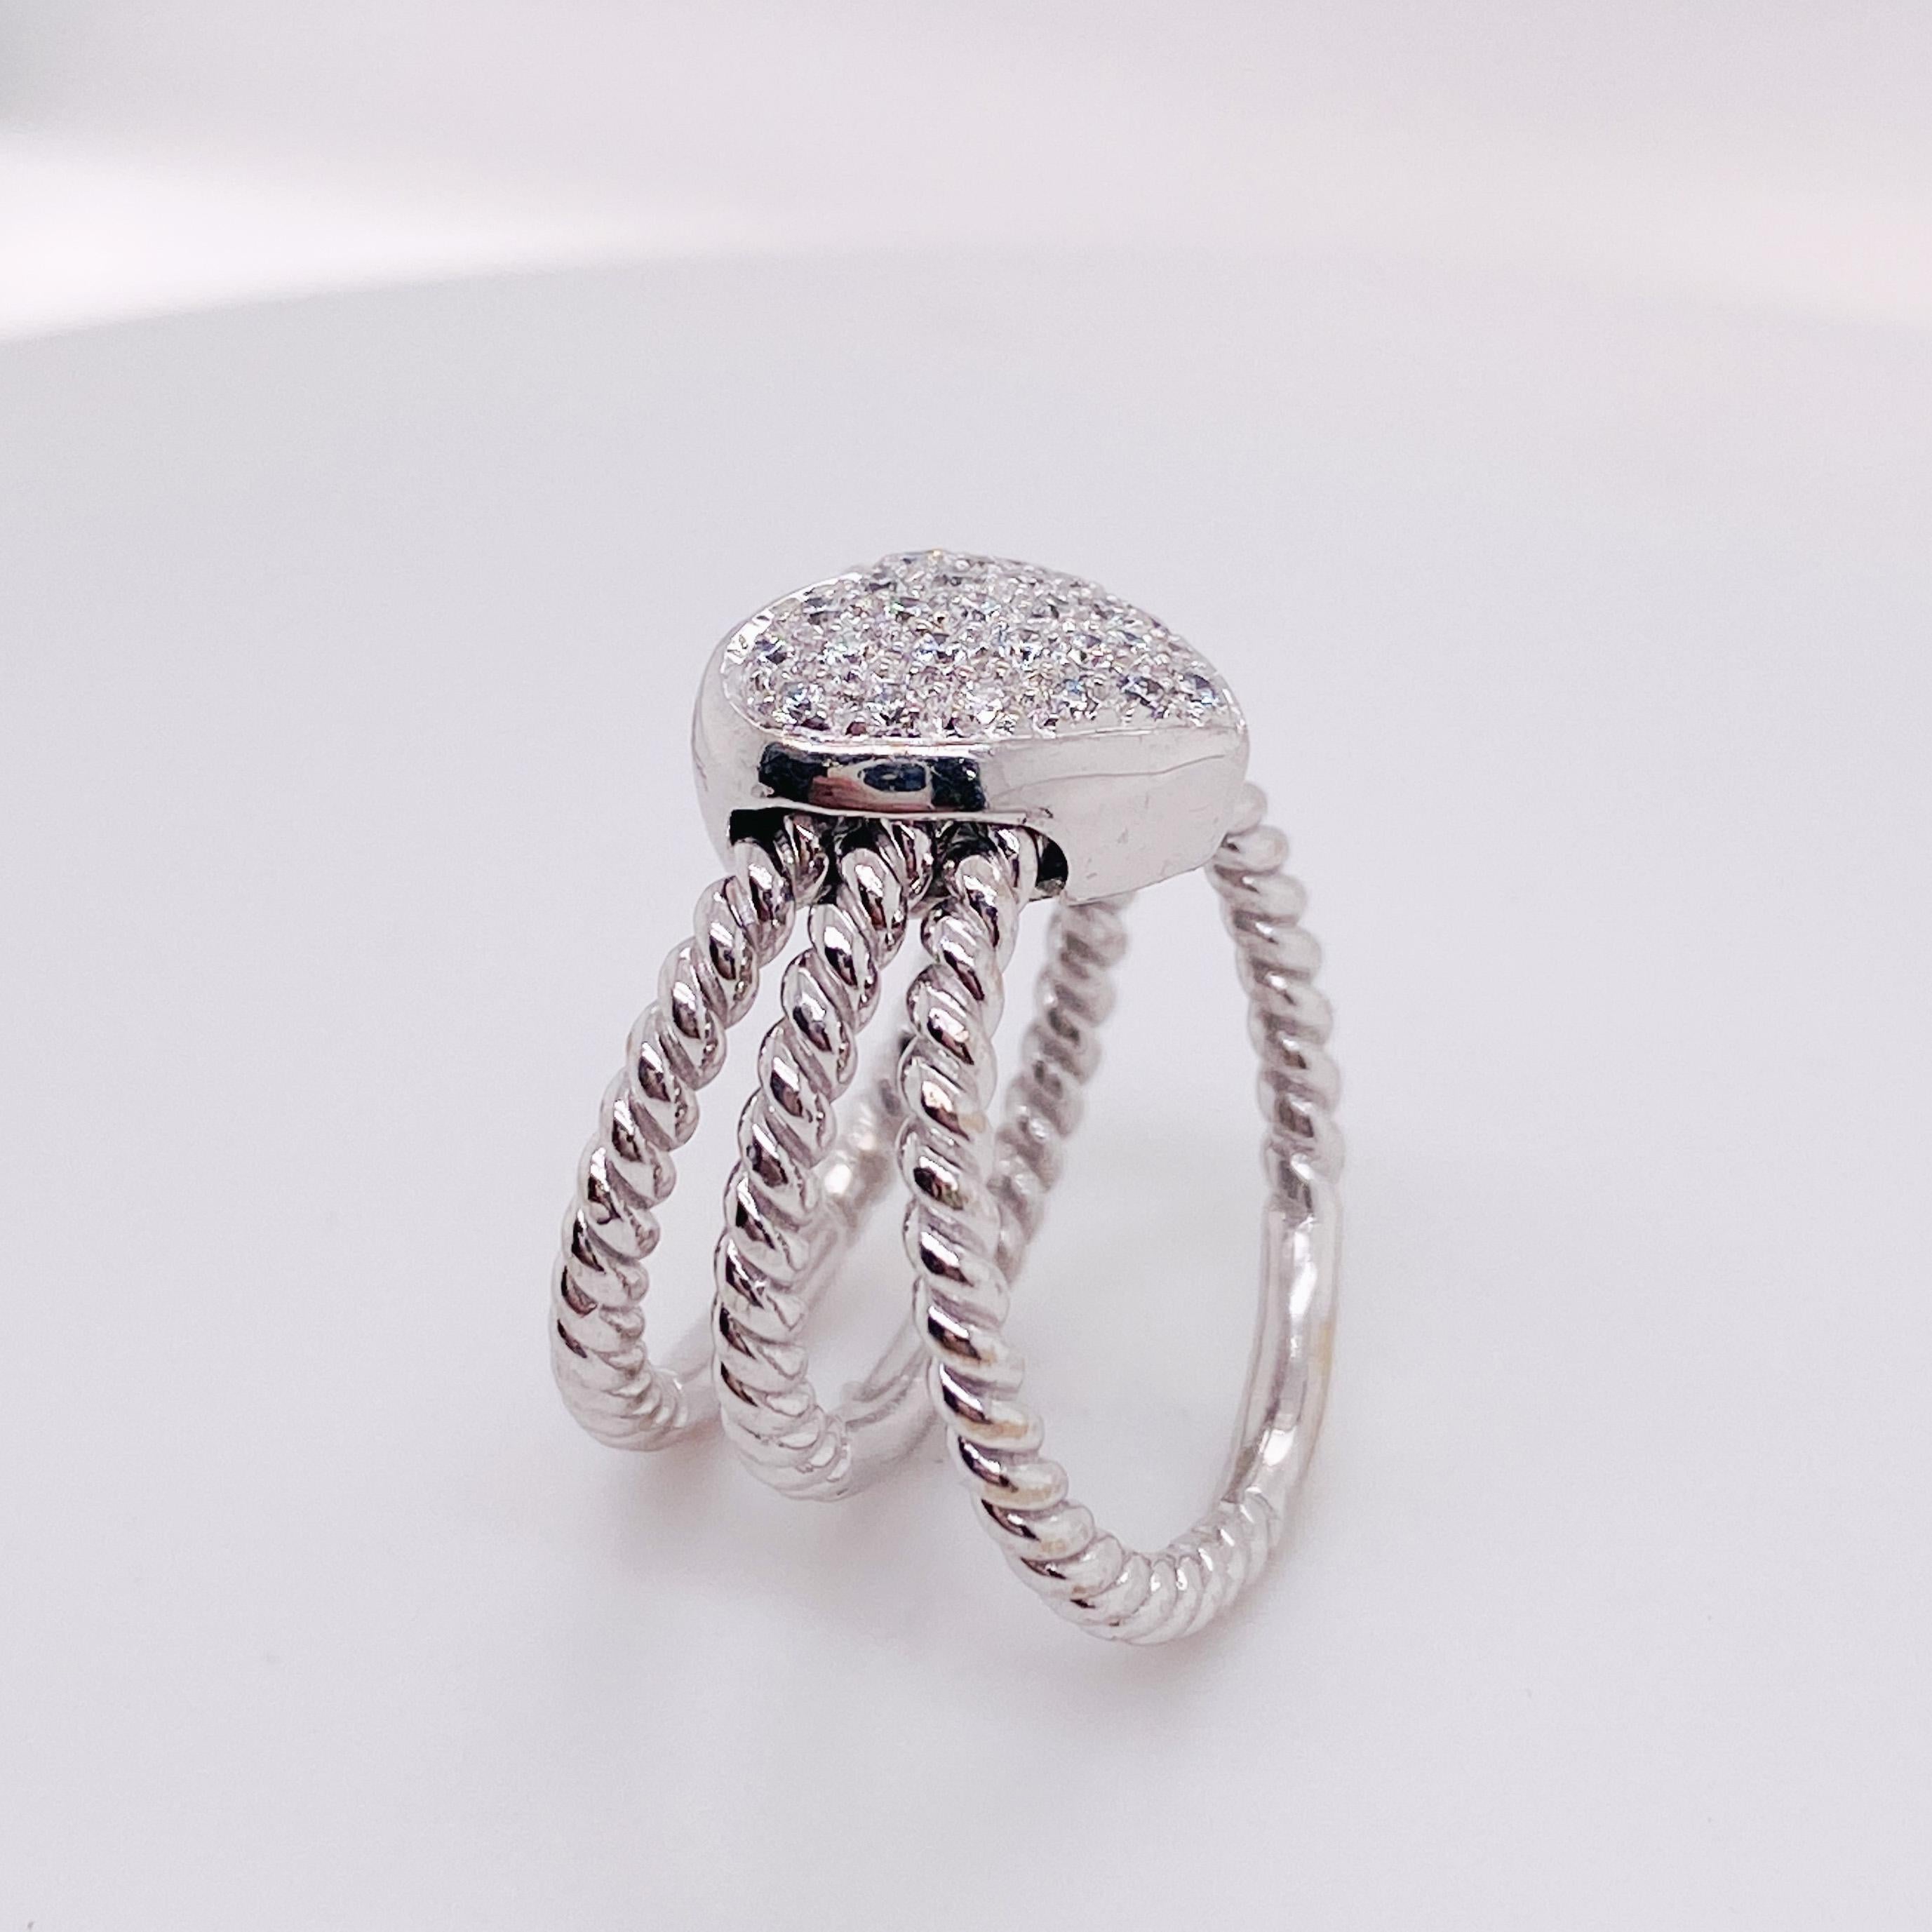 Modern Pave Diamond Heart Ring in 18k White Gold 0.50 Carat Twisted Band Spinner Ring